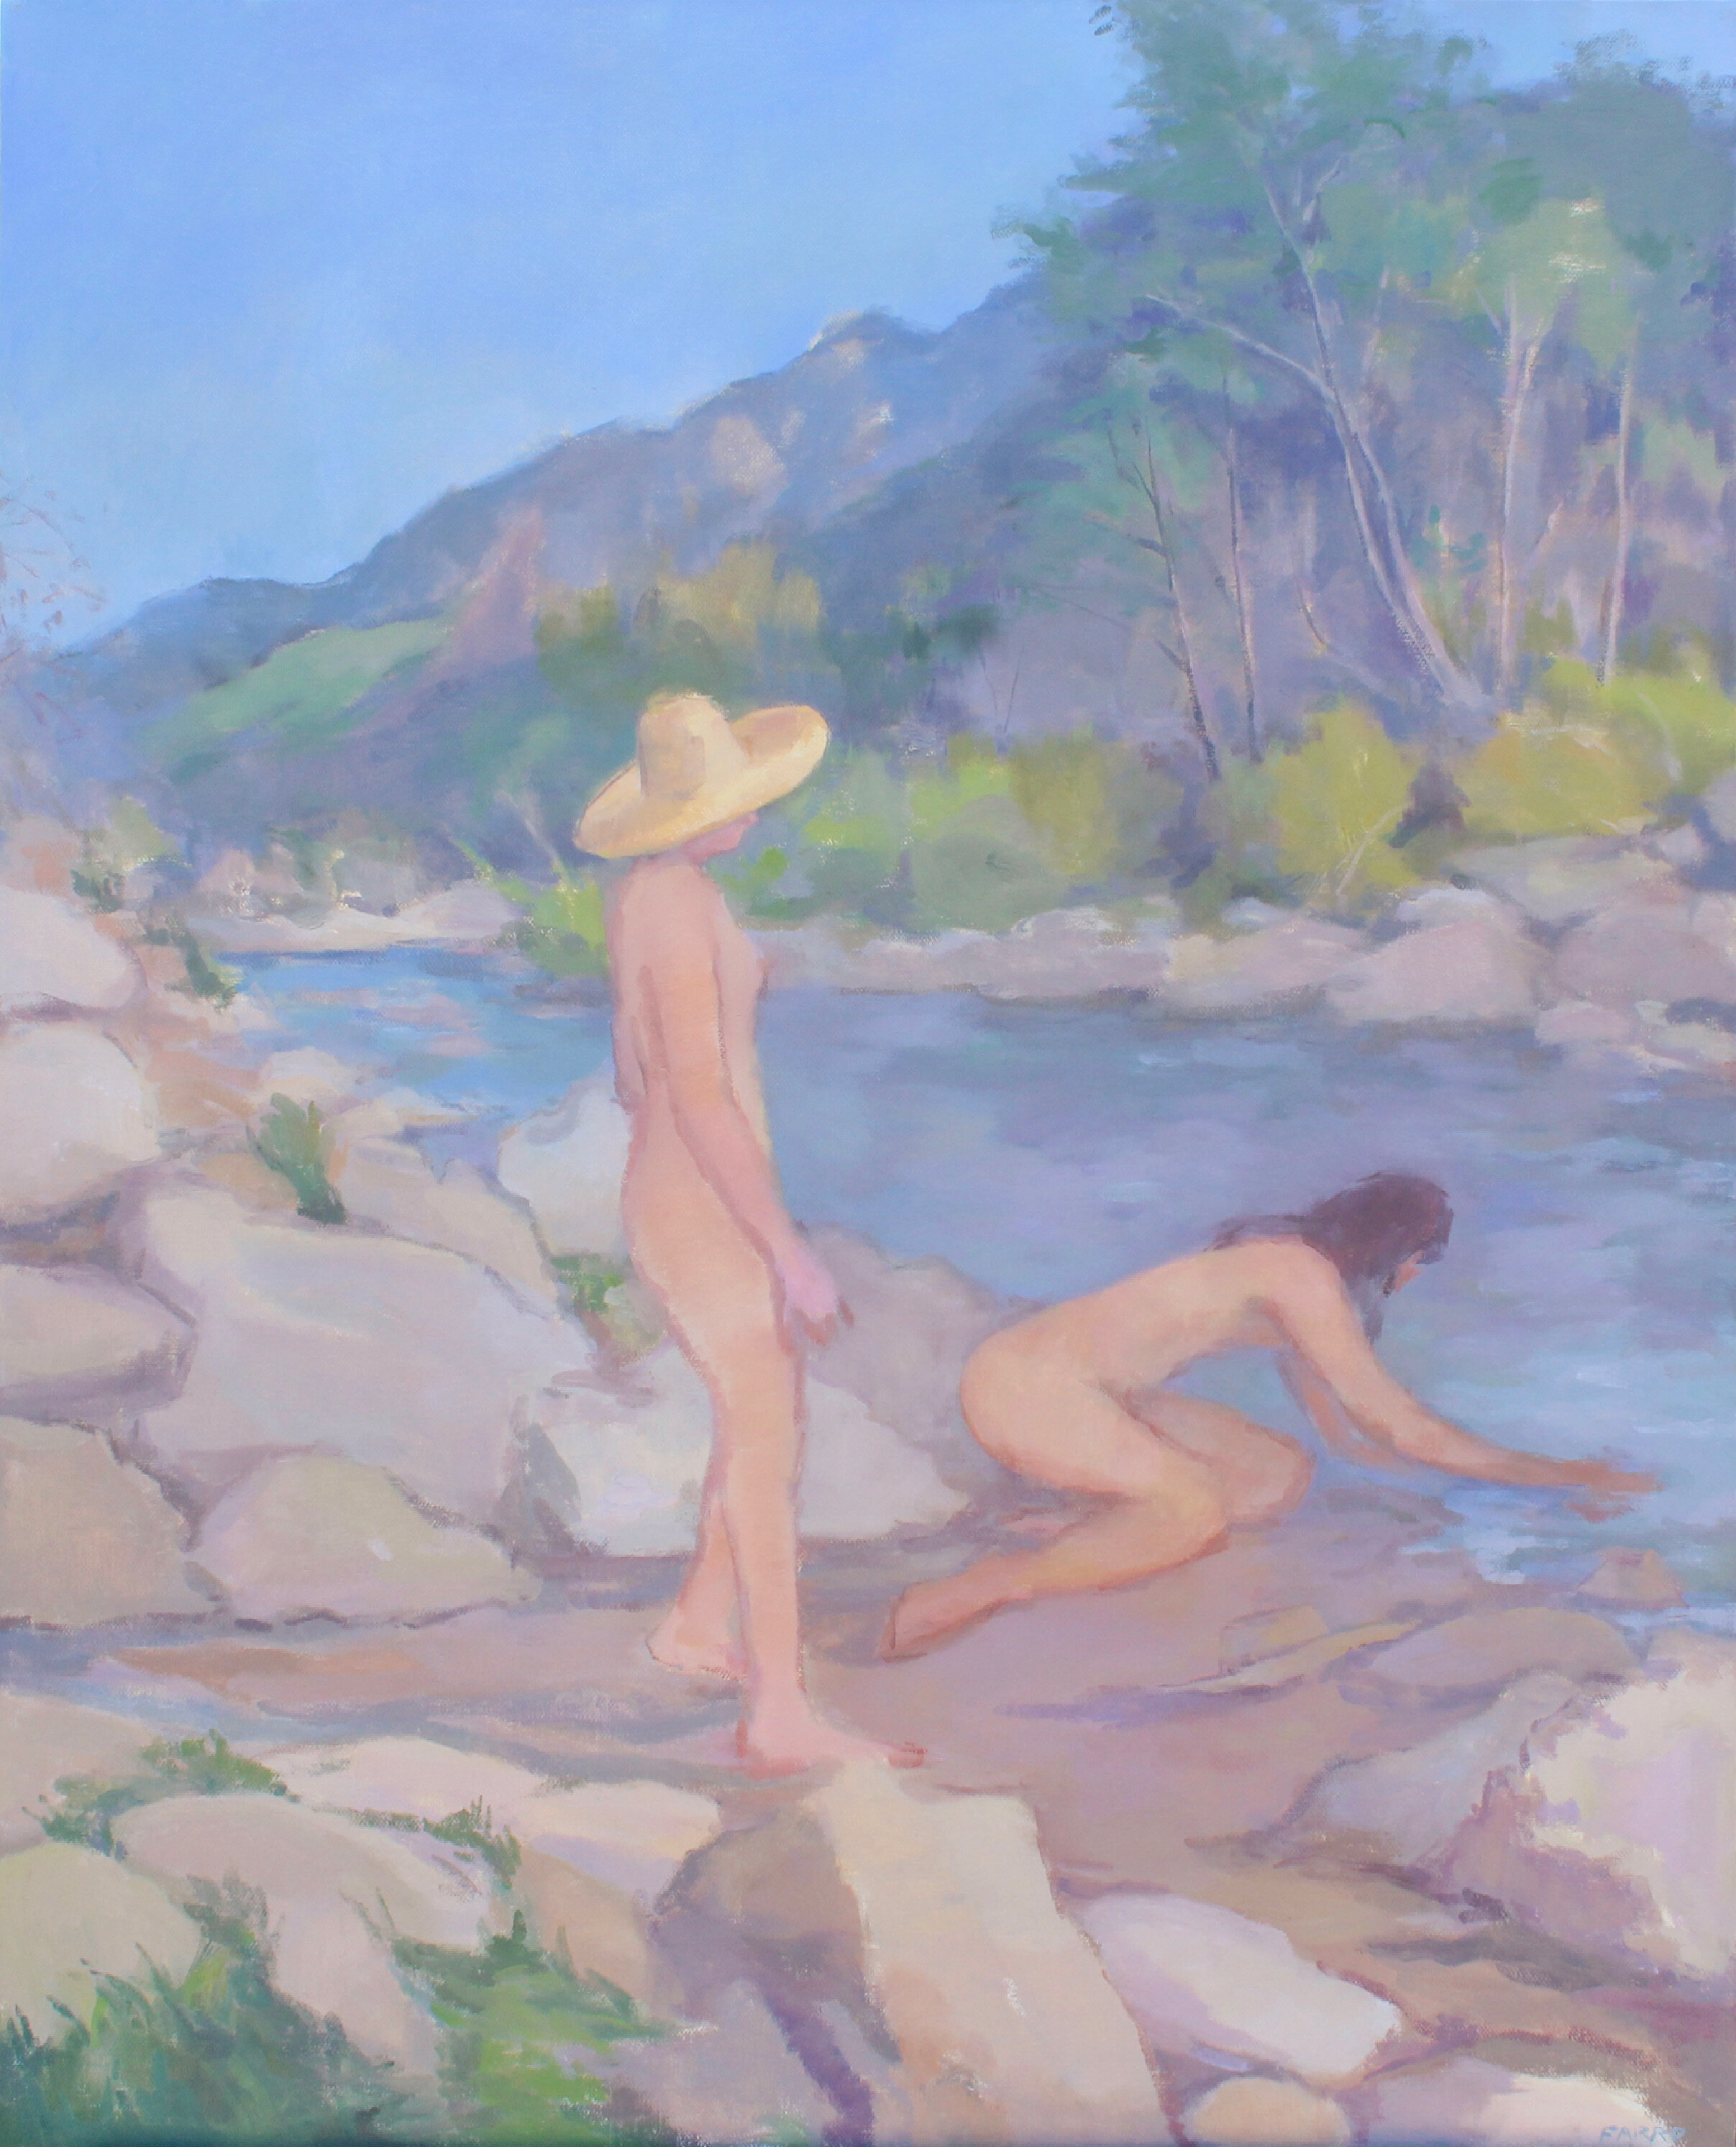    River Bathers   oil on canvas 30 x 24” 2020   purchase  